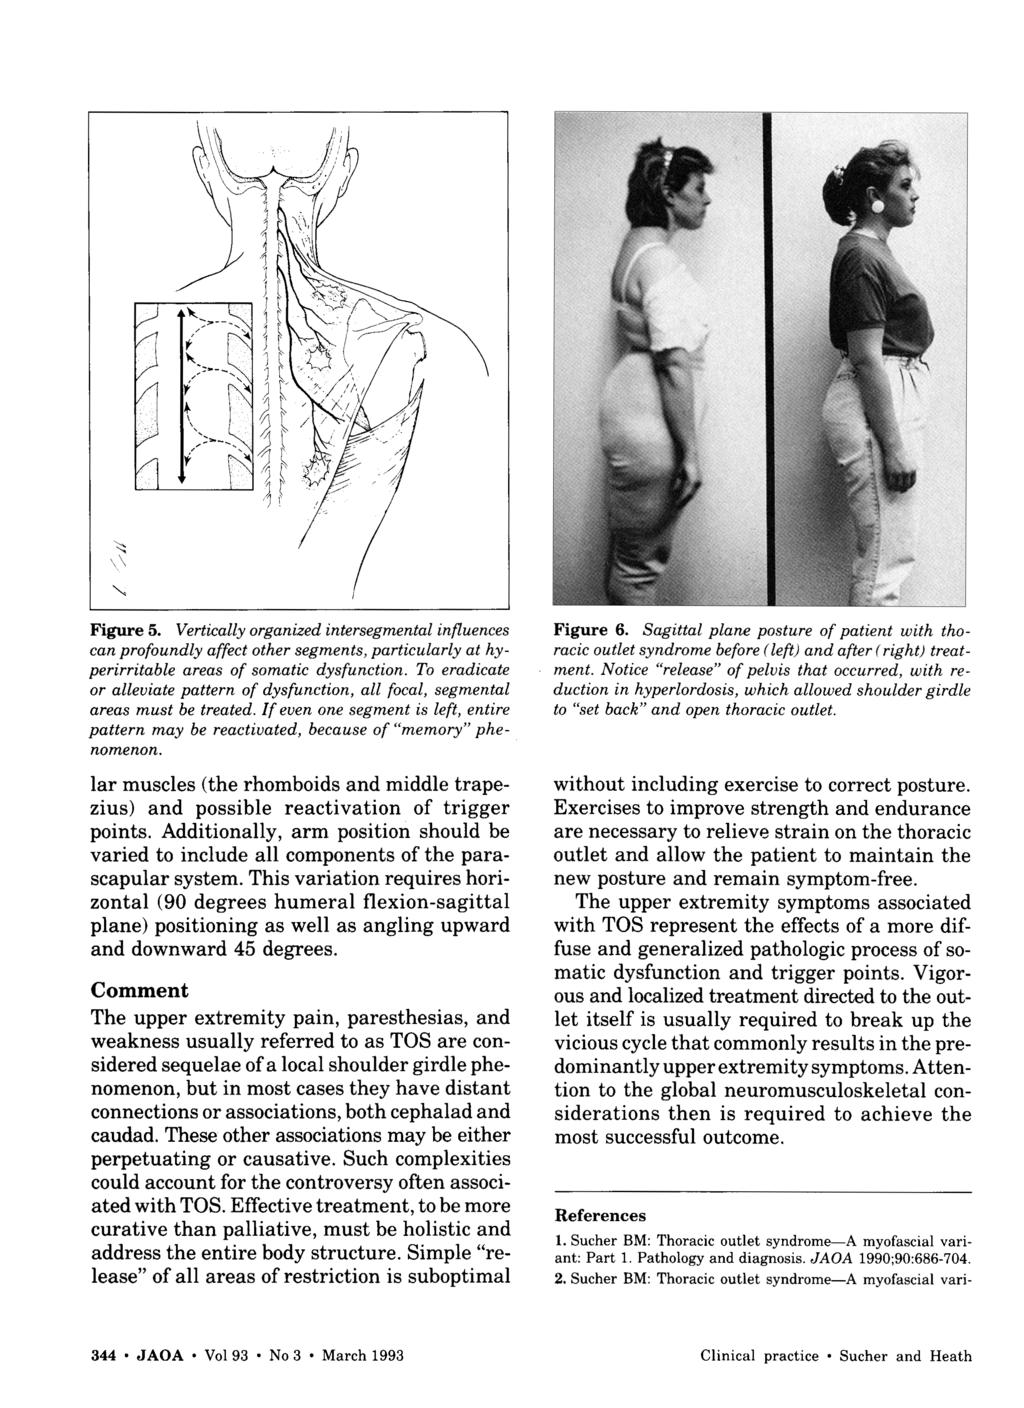 Figure 5. Vertically organized intersegmental influences can profoundly affect other segments, particularly at hyperirritable areas of somatic dysfunction.